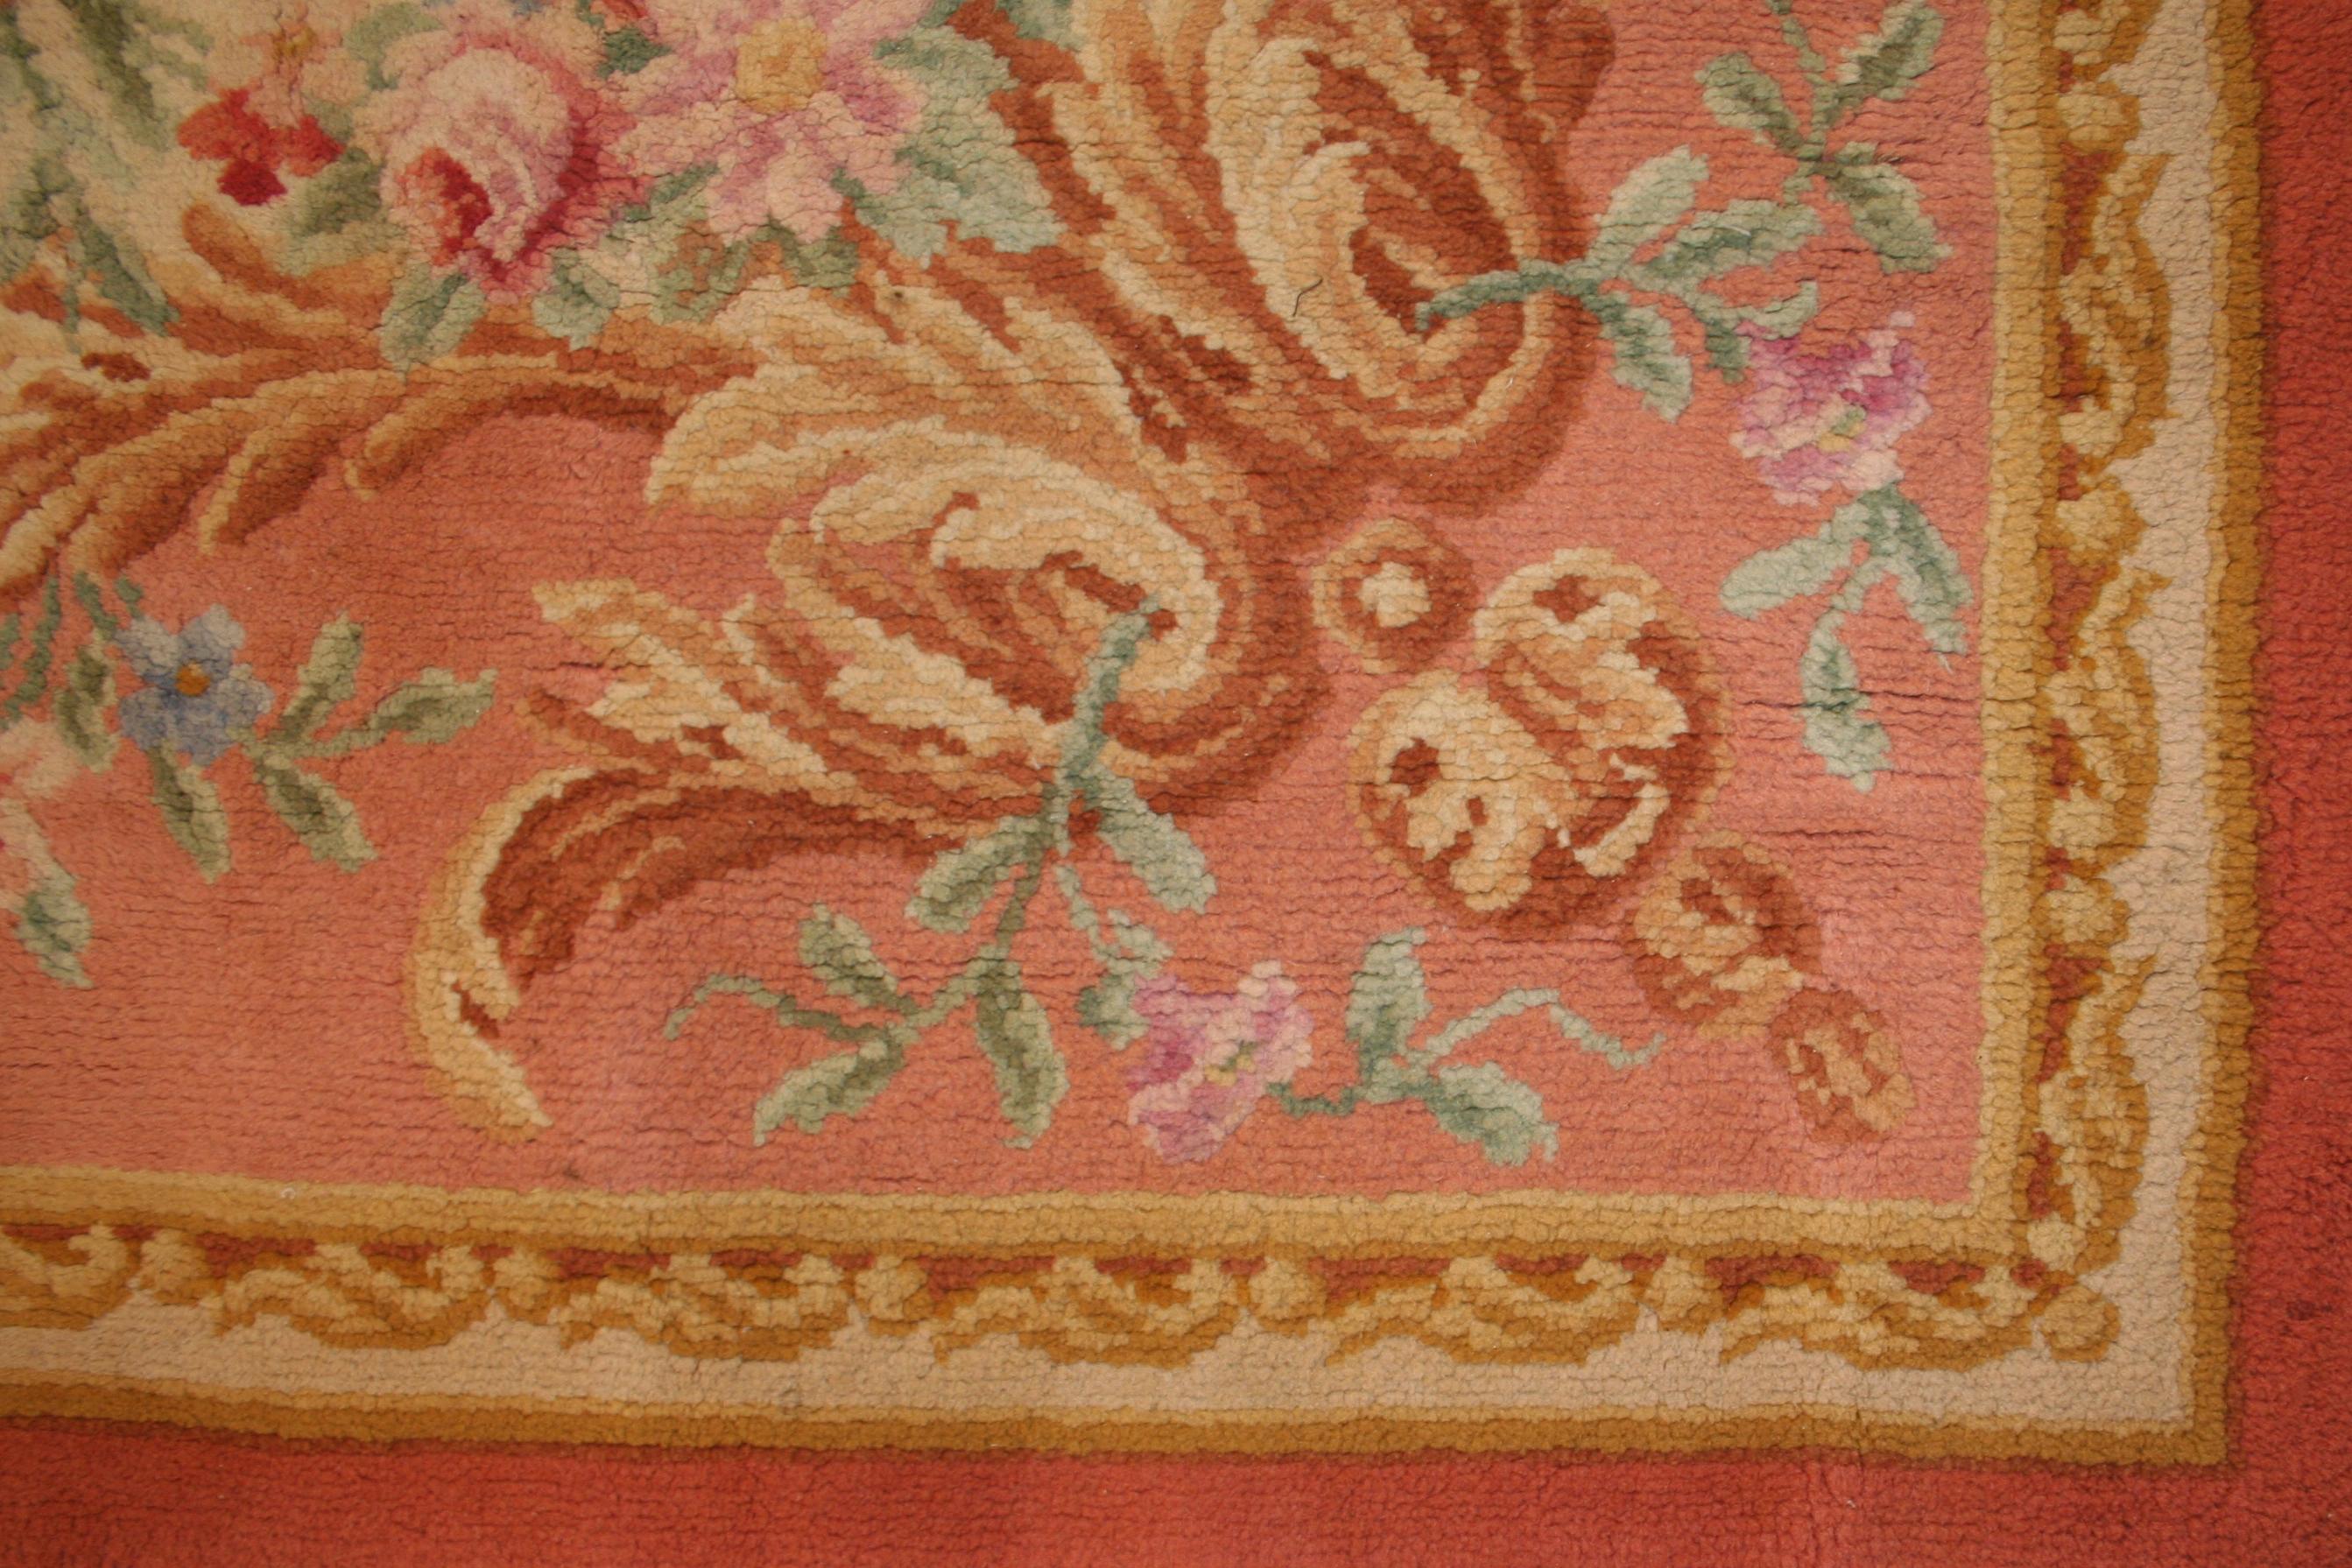 Distinguished by an ivory background punctuated by floral elements in pastel shades, this antique French Savonnerie carpet is characteristic of the late Baroque style which was prevalent in France during the Napoleon III period. The remarkably